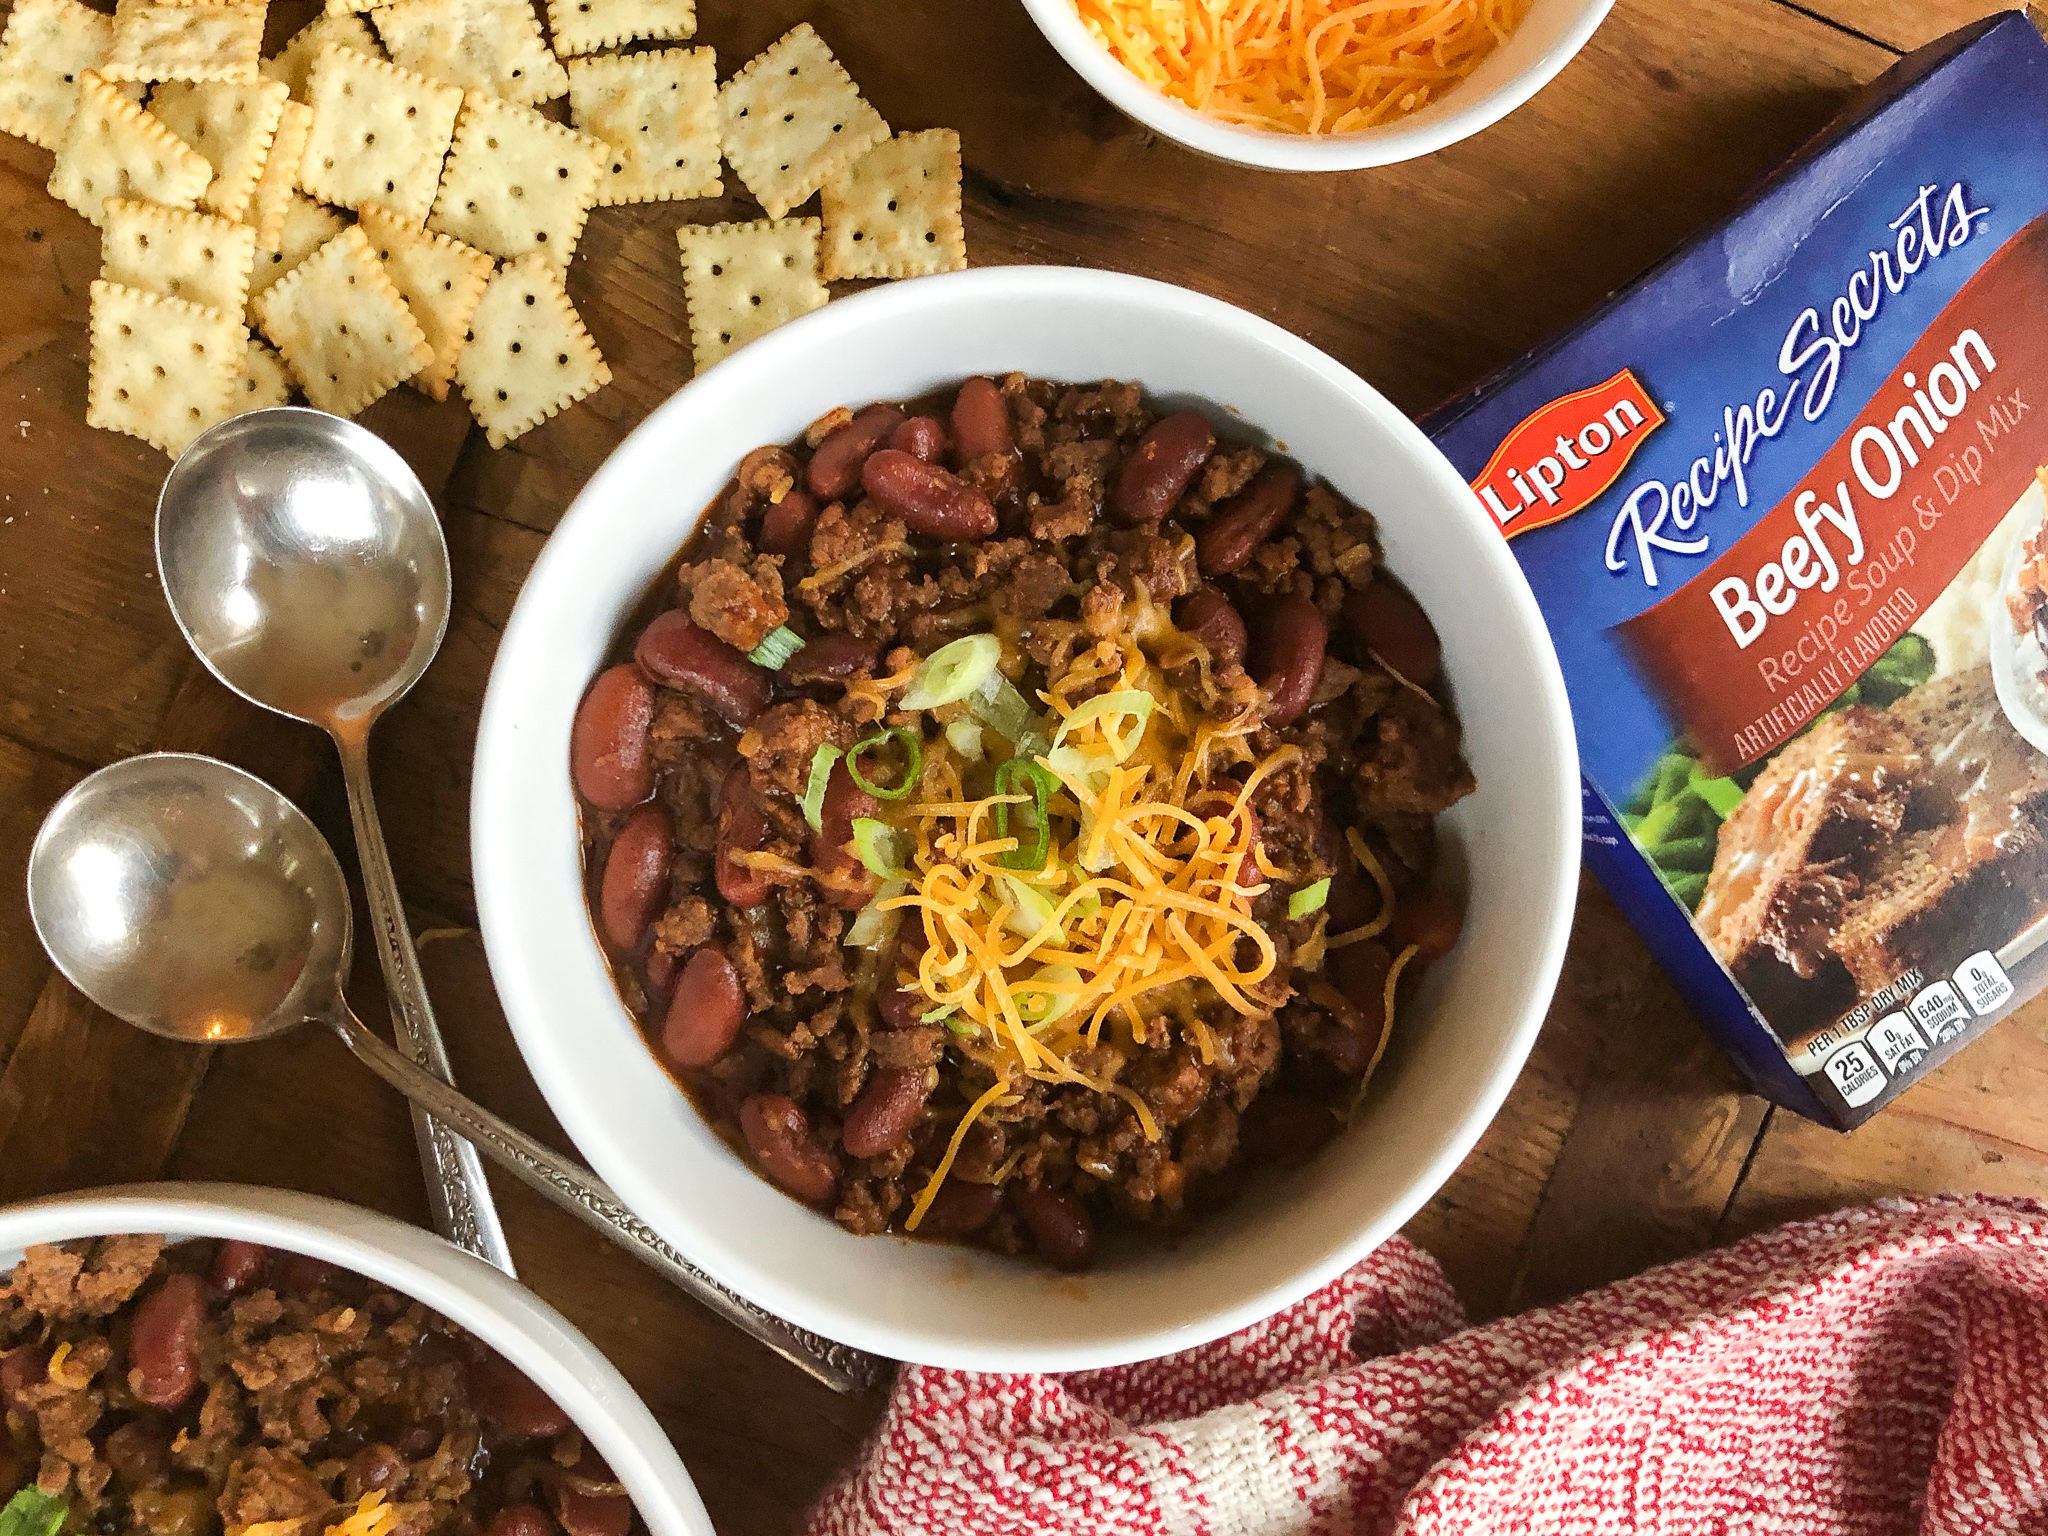 Serve Up This Fast 'n Easy Chili When You Need A Meal In A Flash + Save On Lipton Recipe Secrets At Publix on I Heart Publix 1